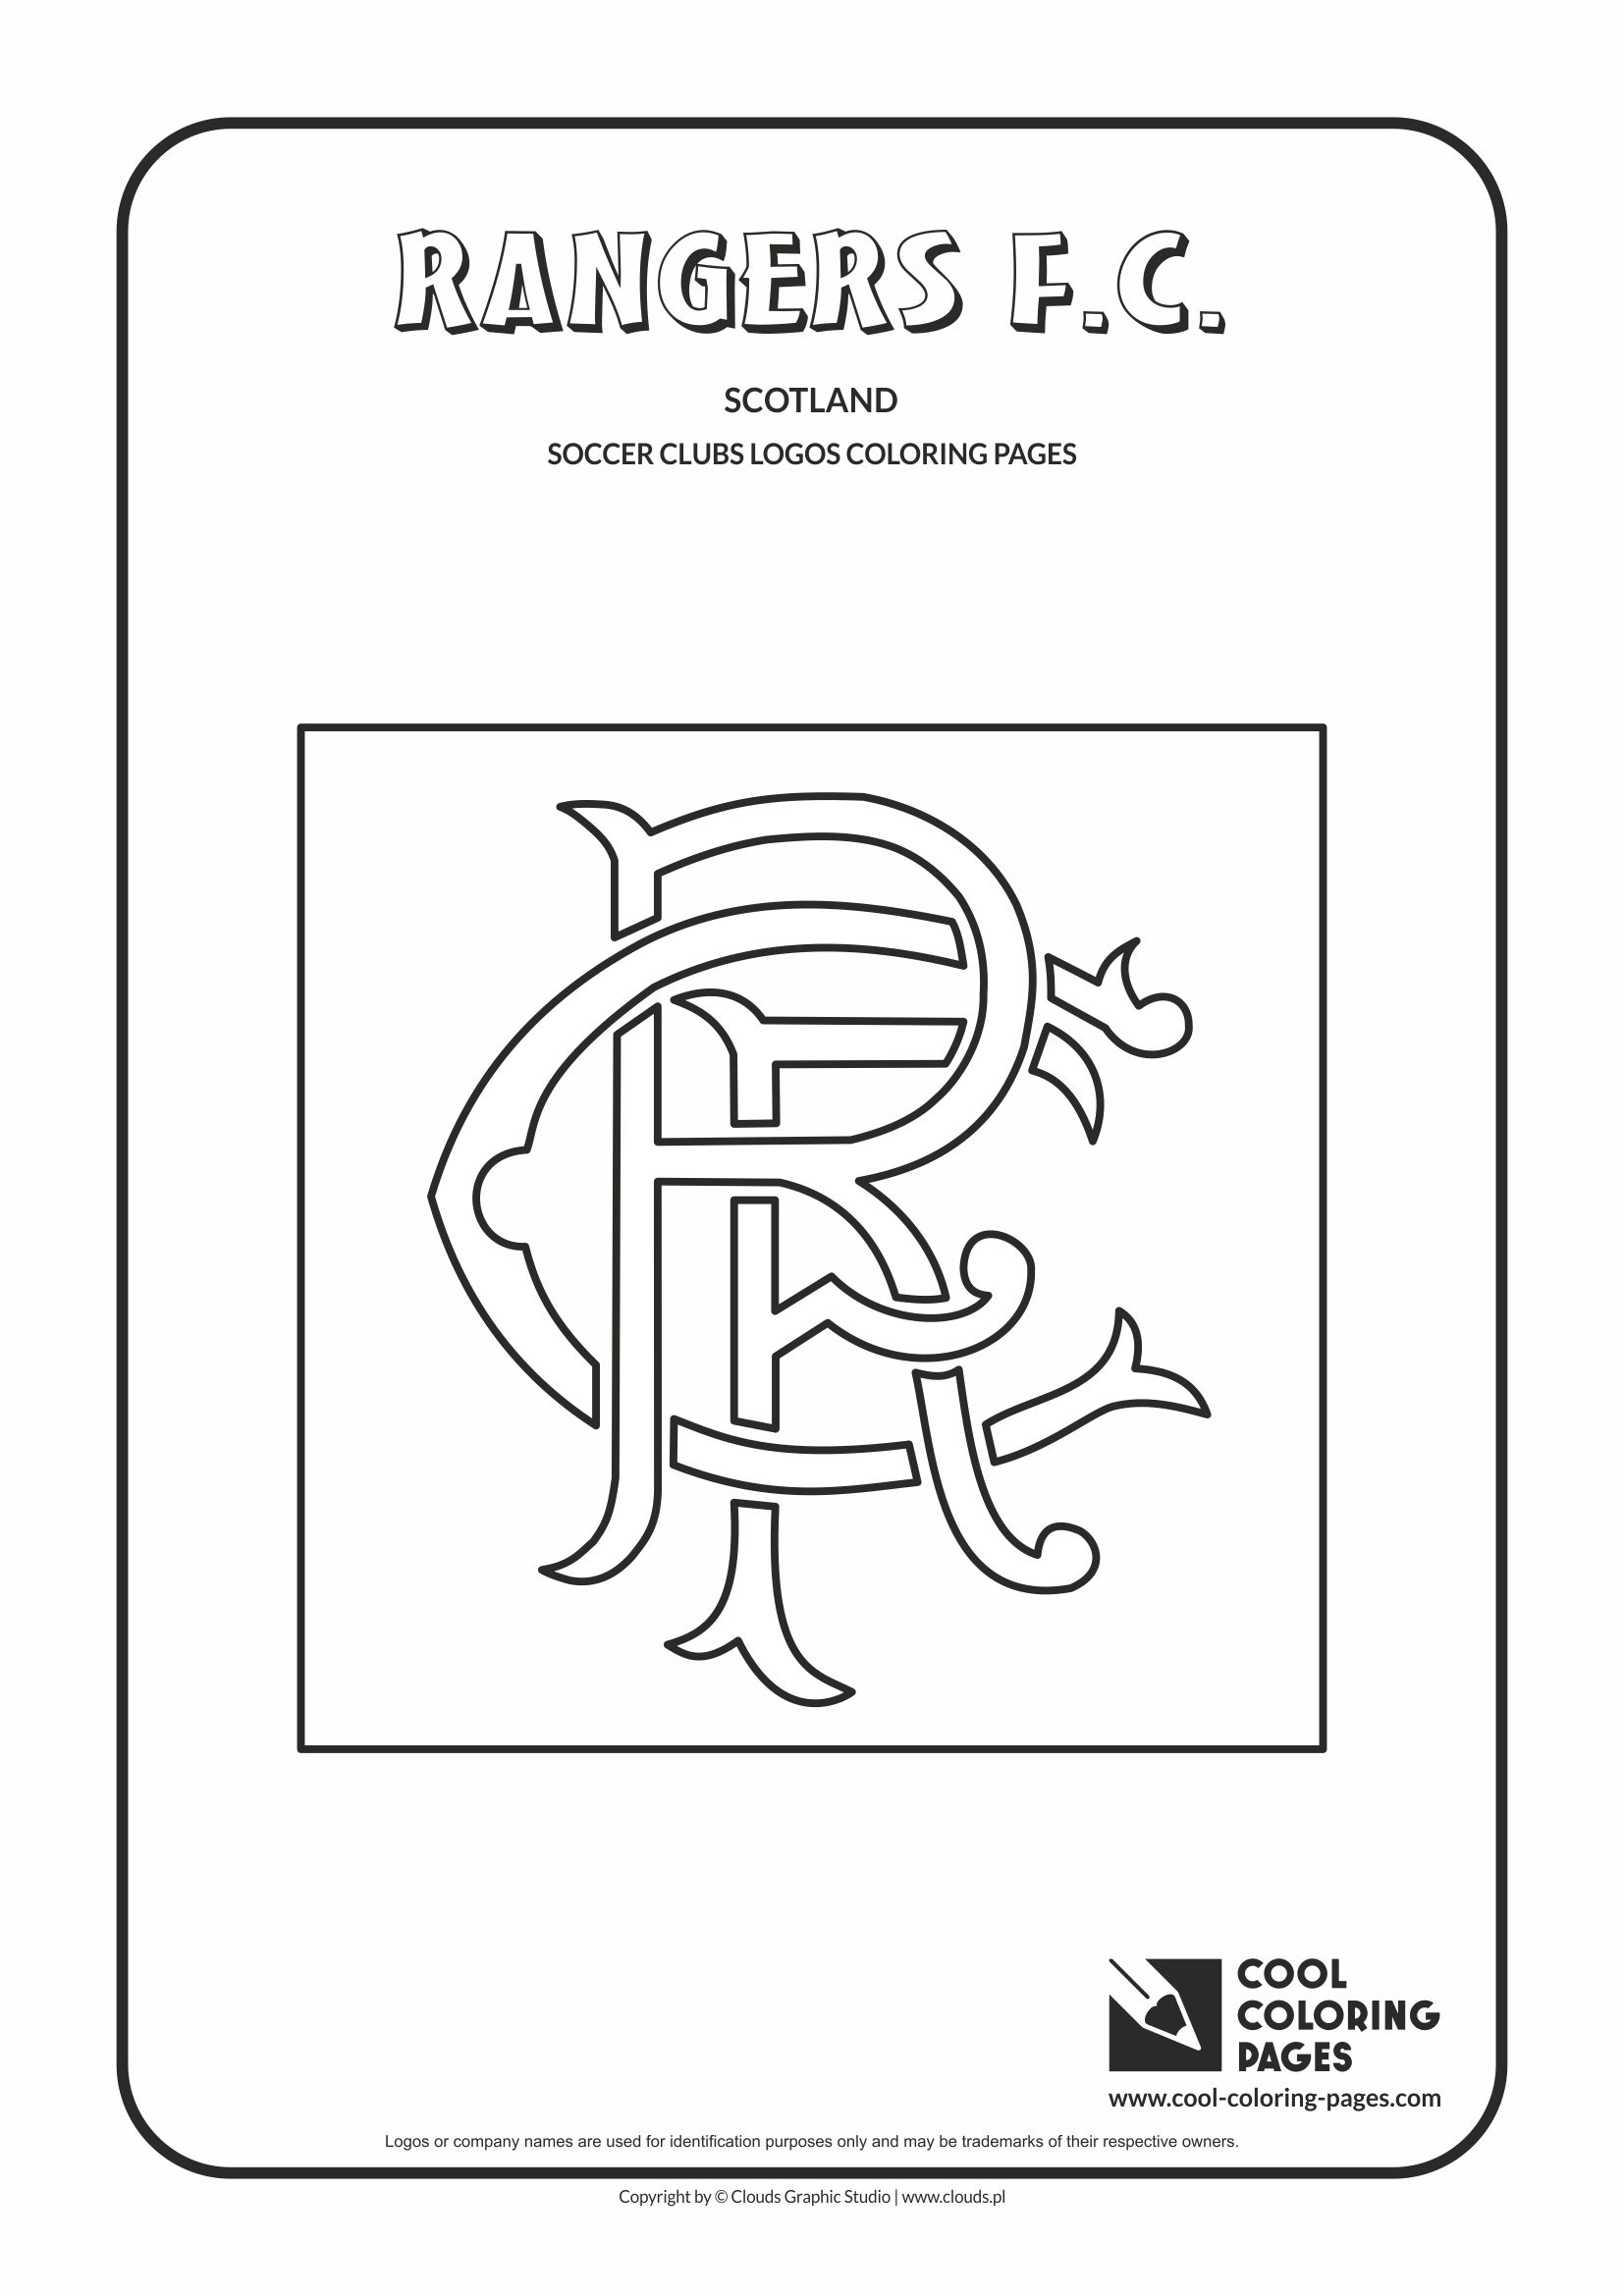 Rangers F.C. logo coloring / Coloring page with Rangers F.C. logo / Rangers F.C. logo colouring page.